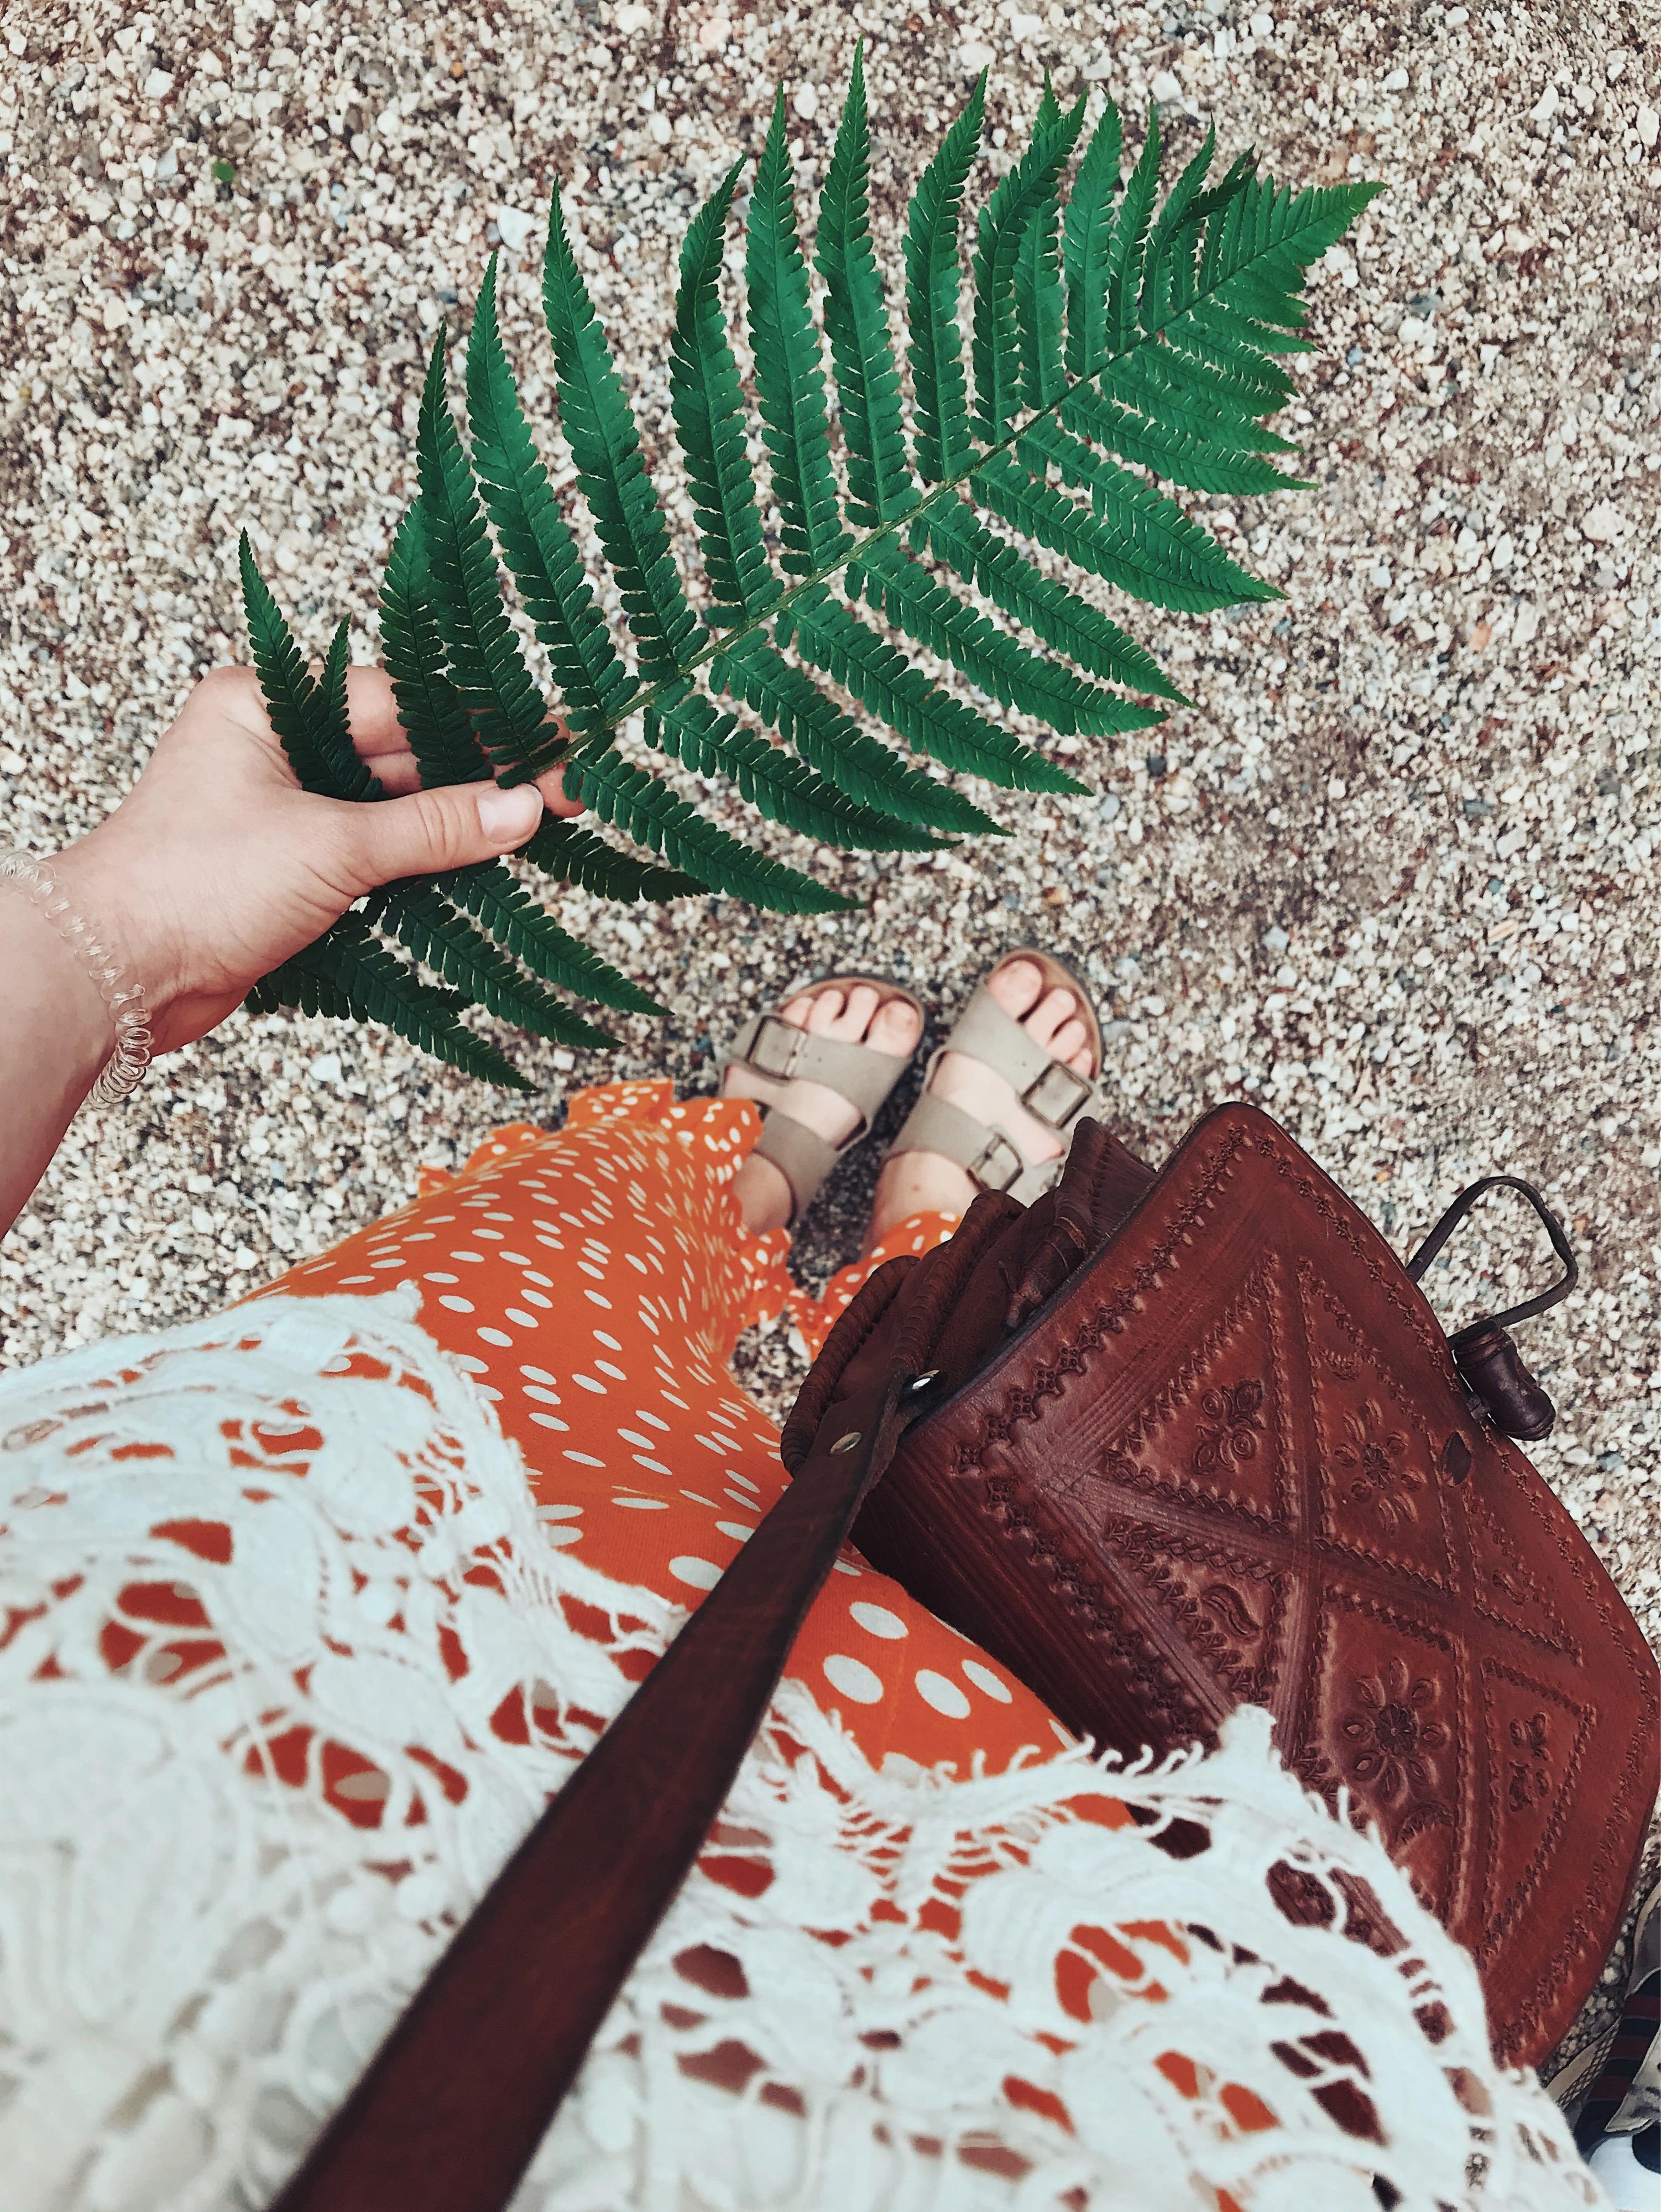 I have this thing with plants #fashionlieblinge 
#sandalen #fromwhereistand #ootd #outfit #farn #urbanjungle